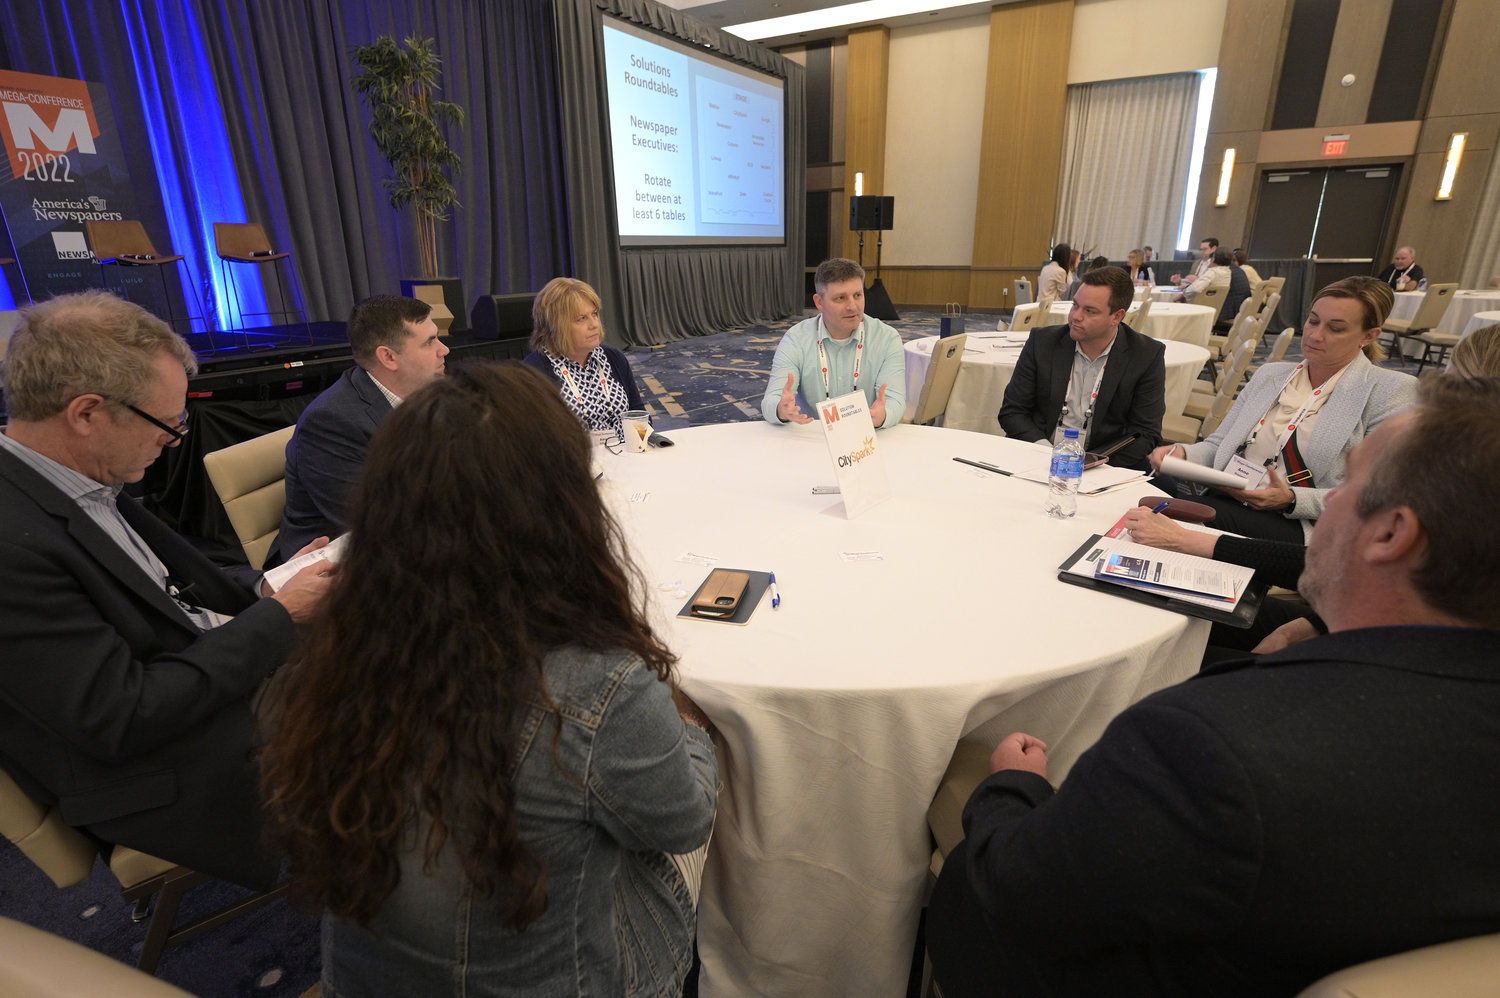 Do you want to drive traffic, engage your community and generate revenue? That was the focus of the discussion at the CitySpark Roundtable. (Photo by Phelan M. Ebenhack)